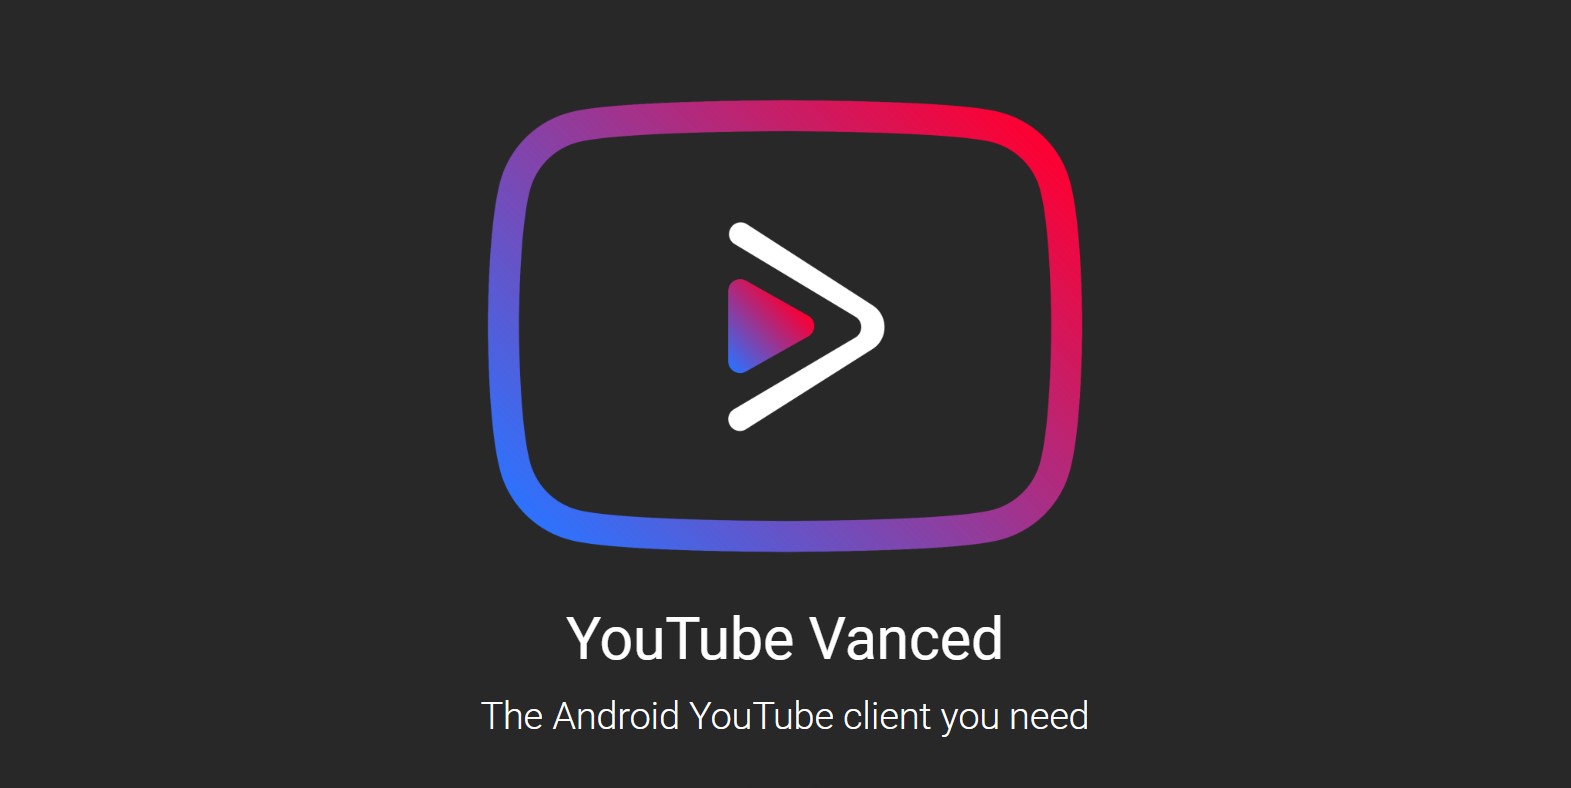 Download and install latest YouTube Vanced v15.05.54 APK ...